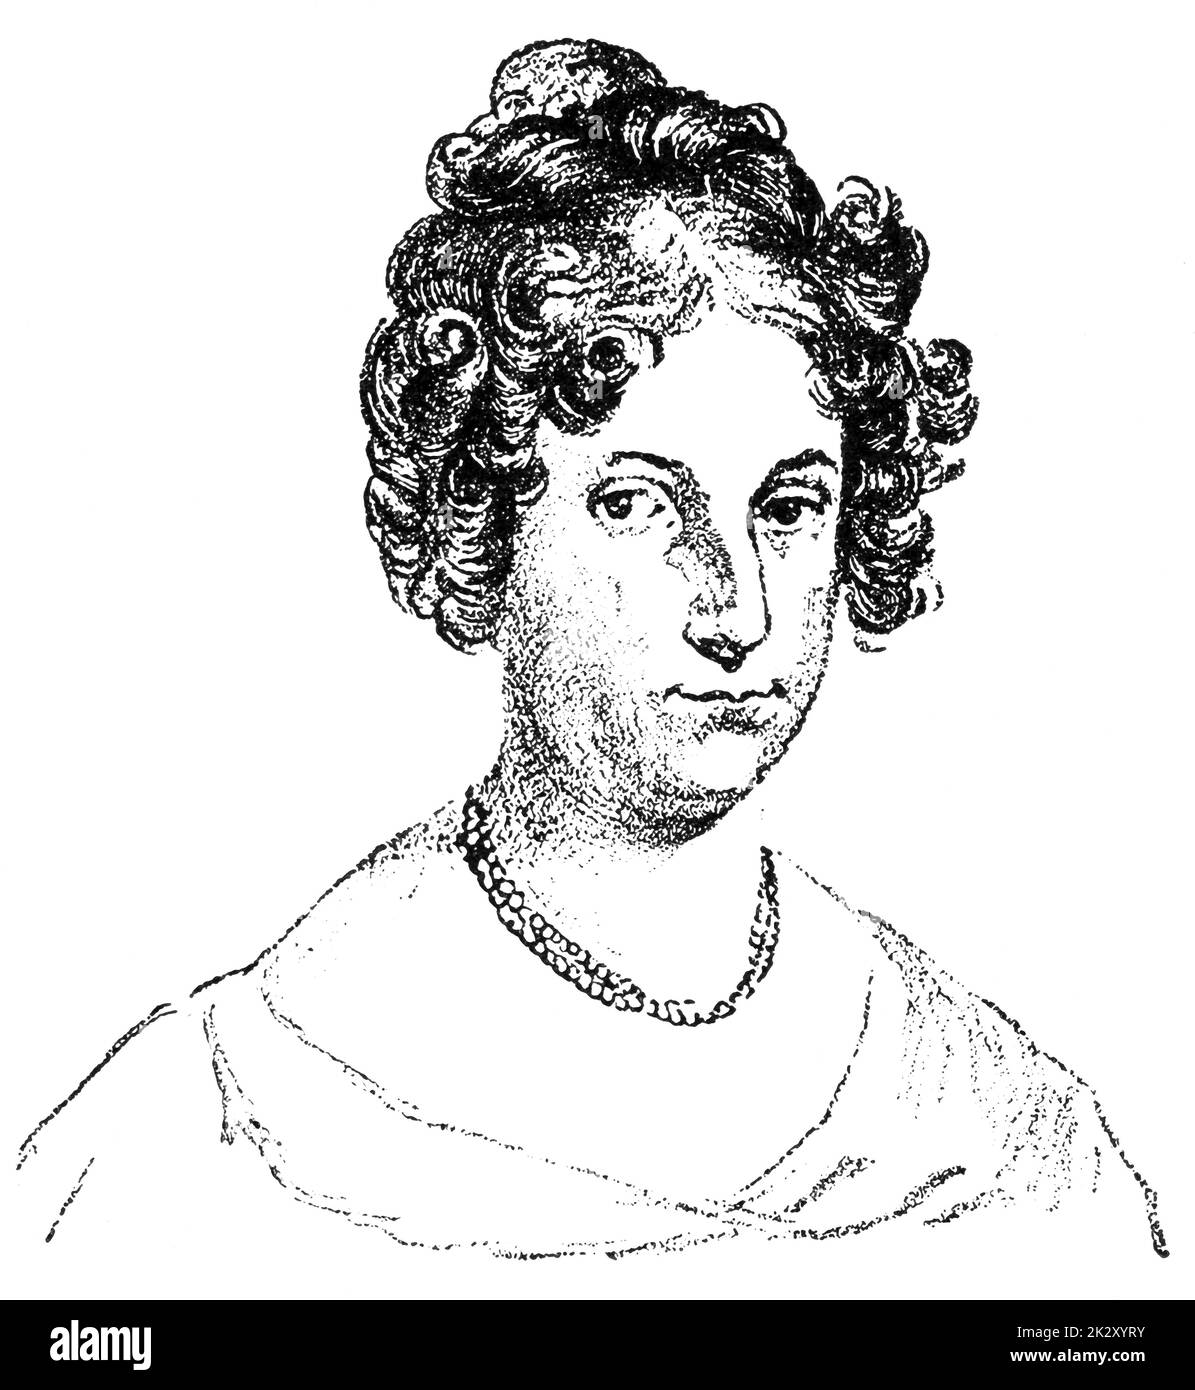 Portrait of Rahel Varnhagen - a German writer who hosted one of the most prominent salons in Europe during the late 18th and early 19th centuries. Illustration of the 19th century. White background. Stock Photo